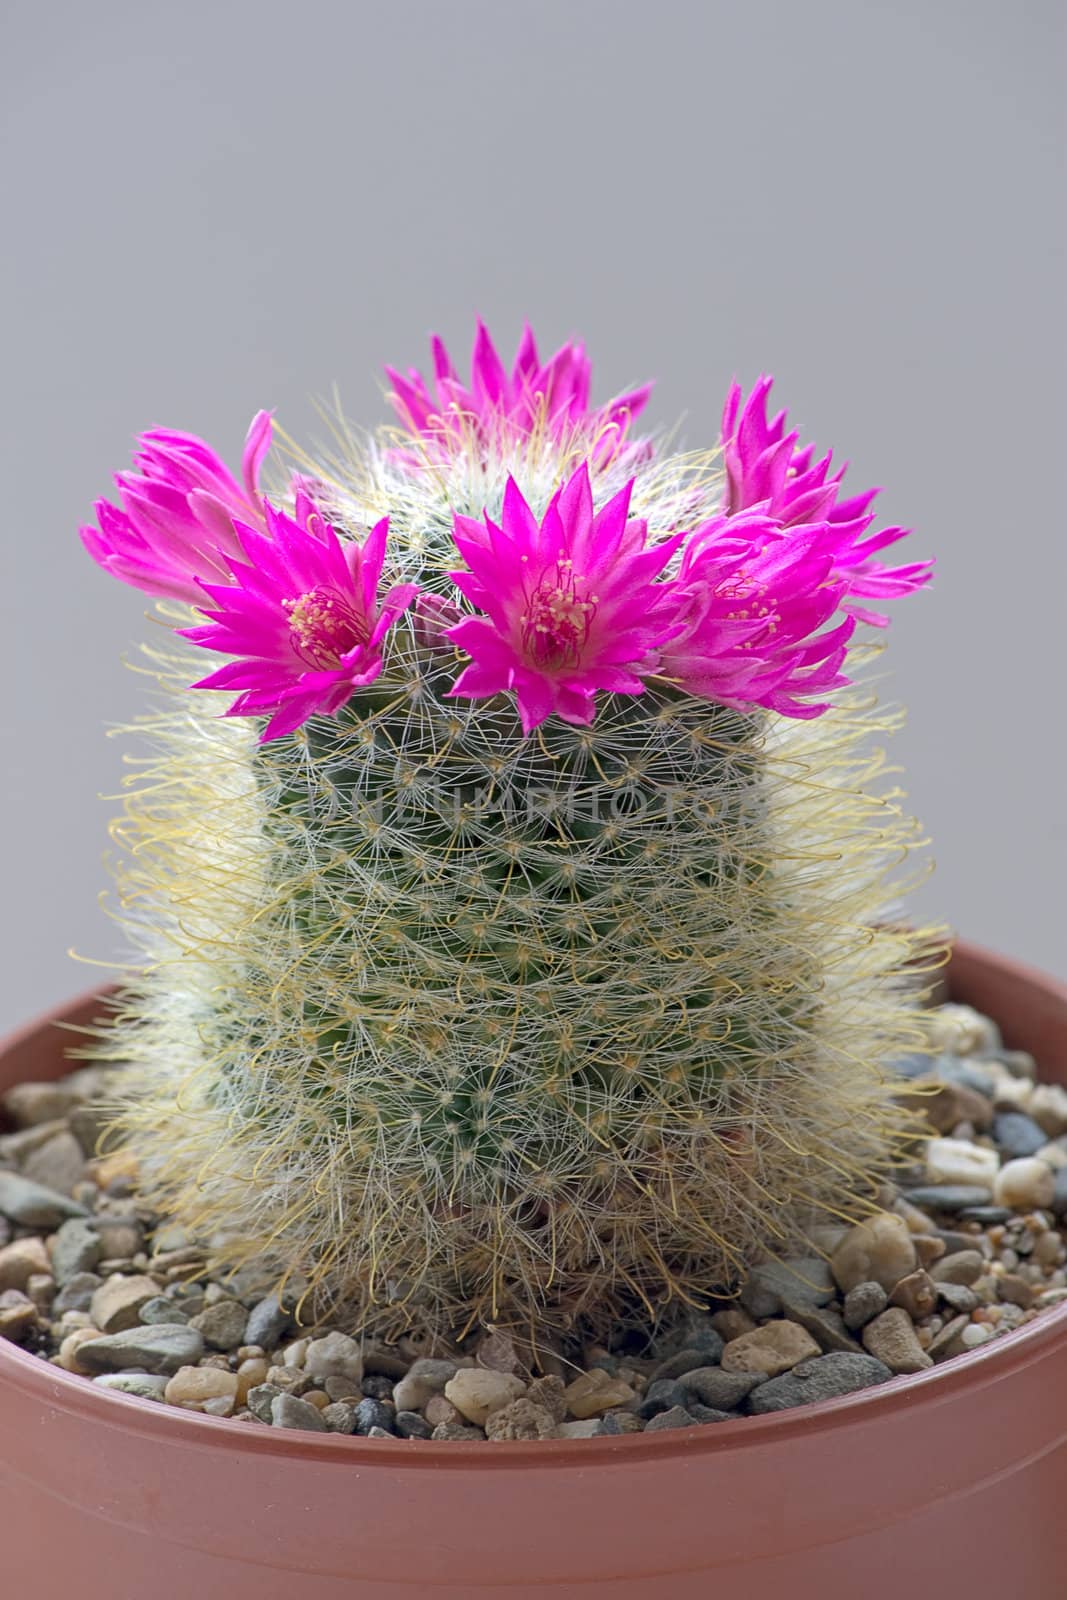 Cactus with blossoms on  dark background (Mammillaria).Image with shallow depth of field.